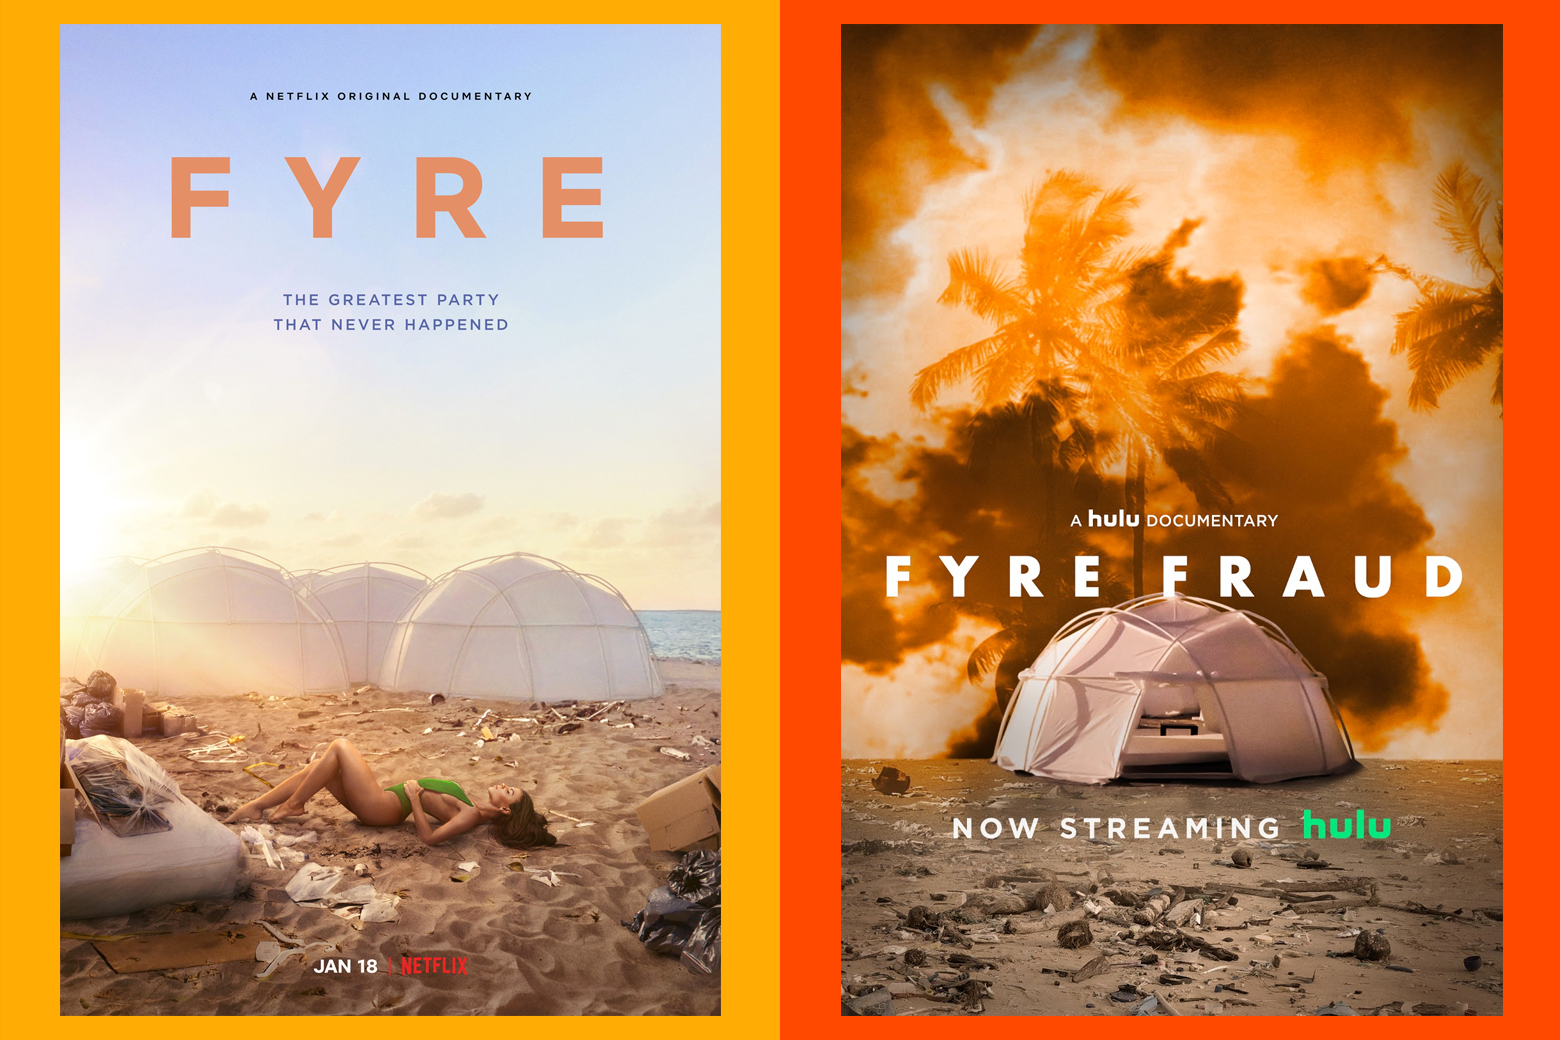 The posters for Netflix's Fyre and Hulu's Fyre Fraud, side by side.